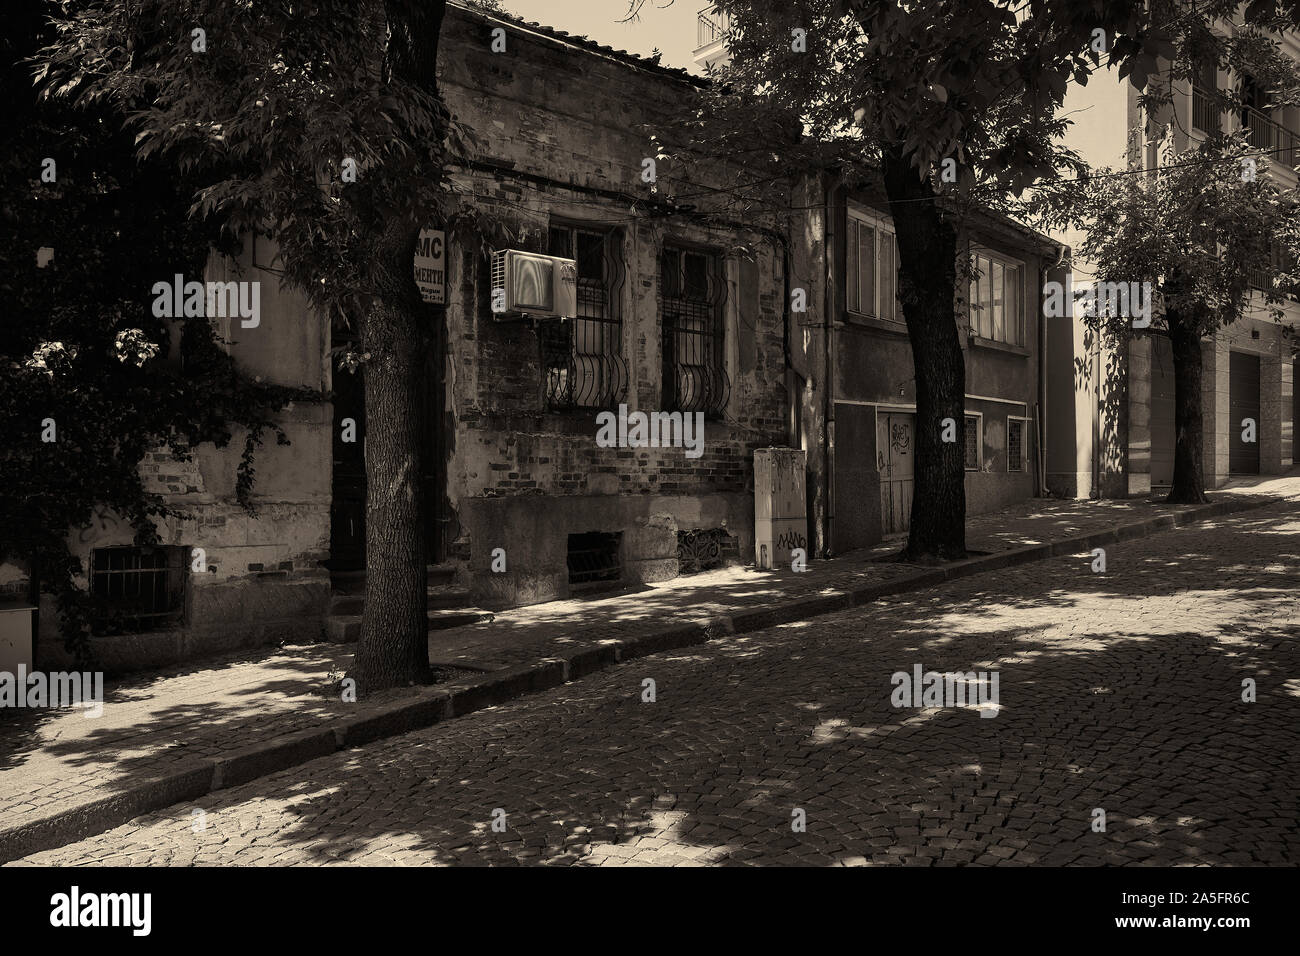 PLOVDIV, BULGARIA - JULY 02, 2019: One of the streets in the old city. Plovdiv is the second largest city in Bulgaria. Vintage toning. Sepia. Stock Photo